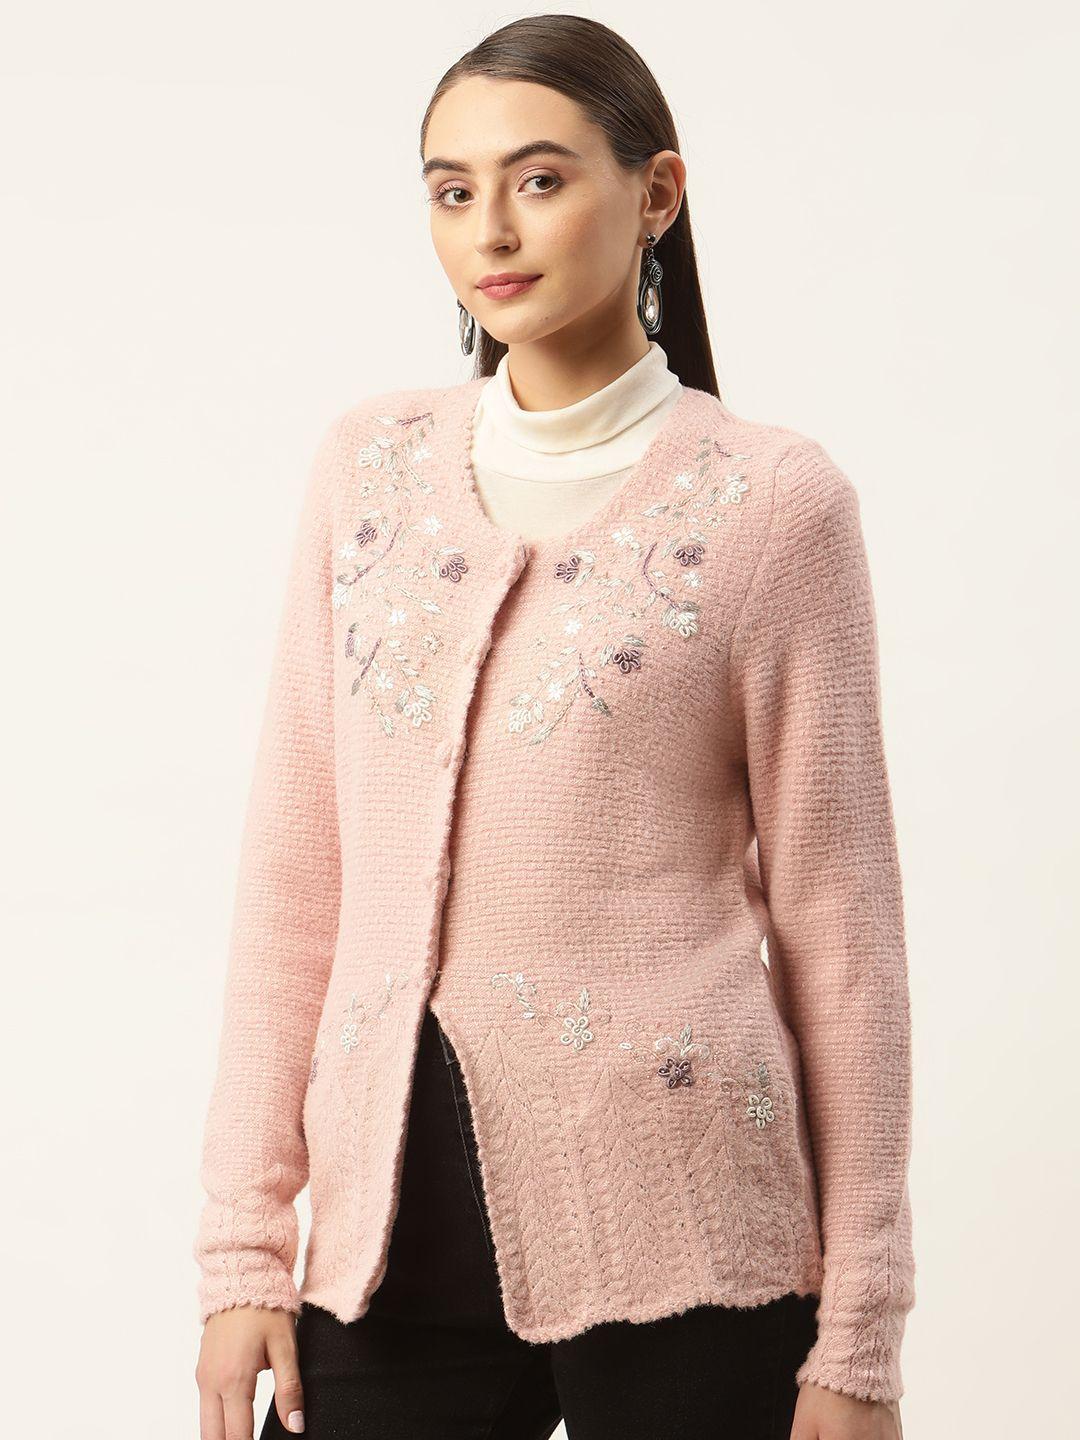 apsley-women-floral-embroidered-cardigan